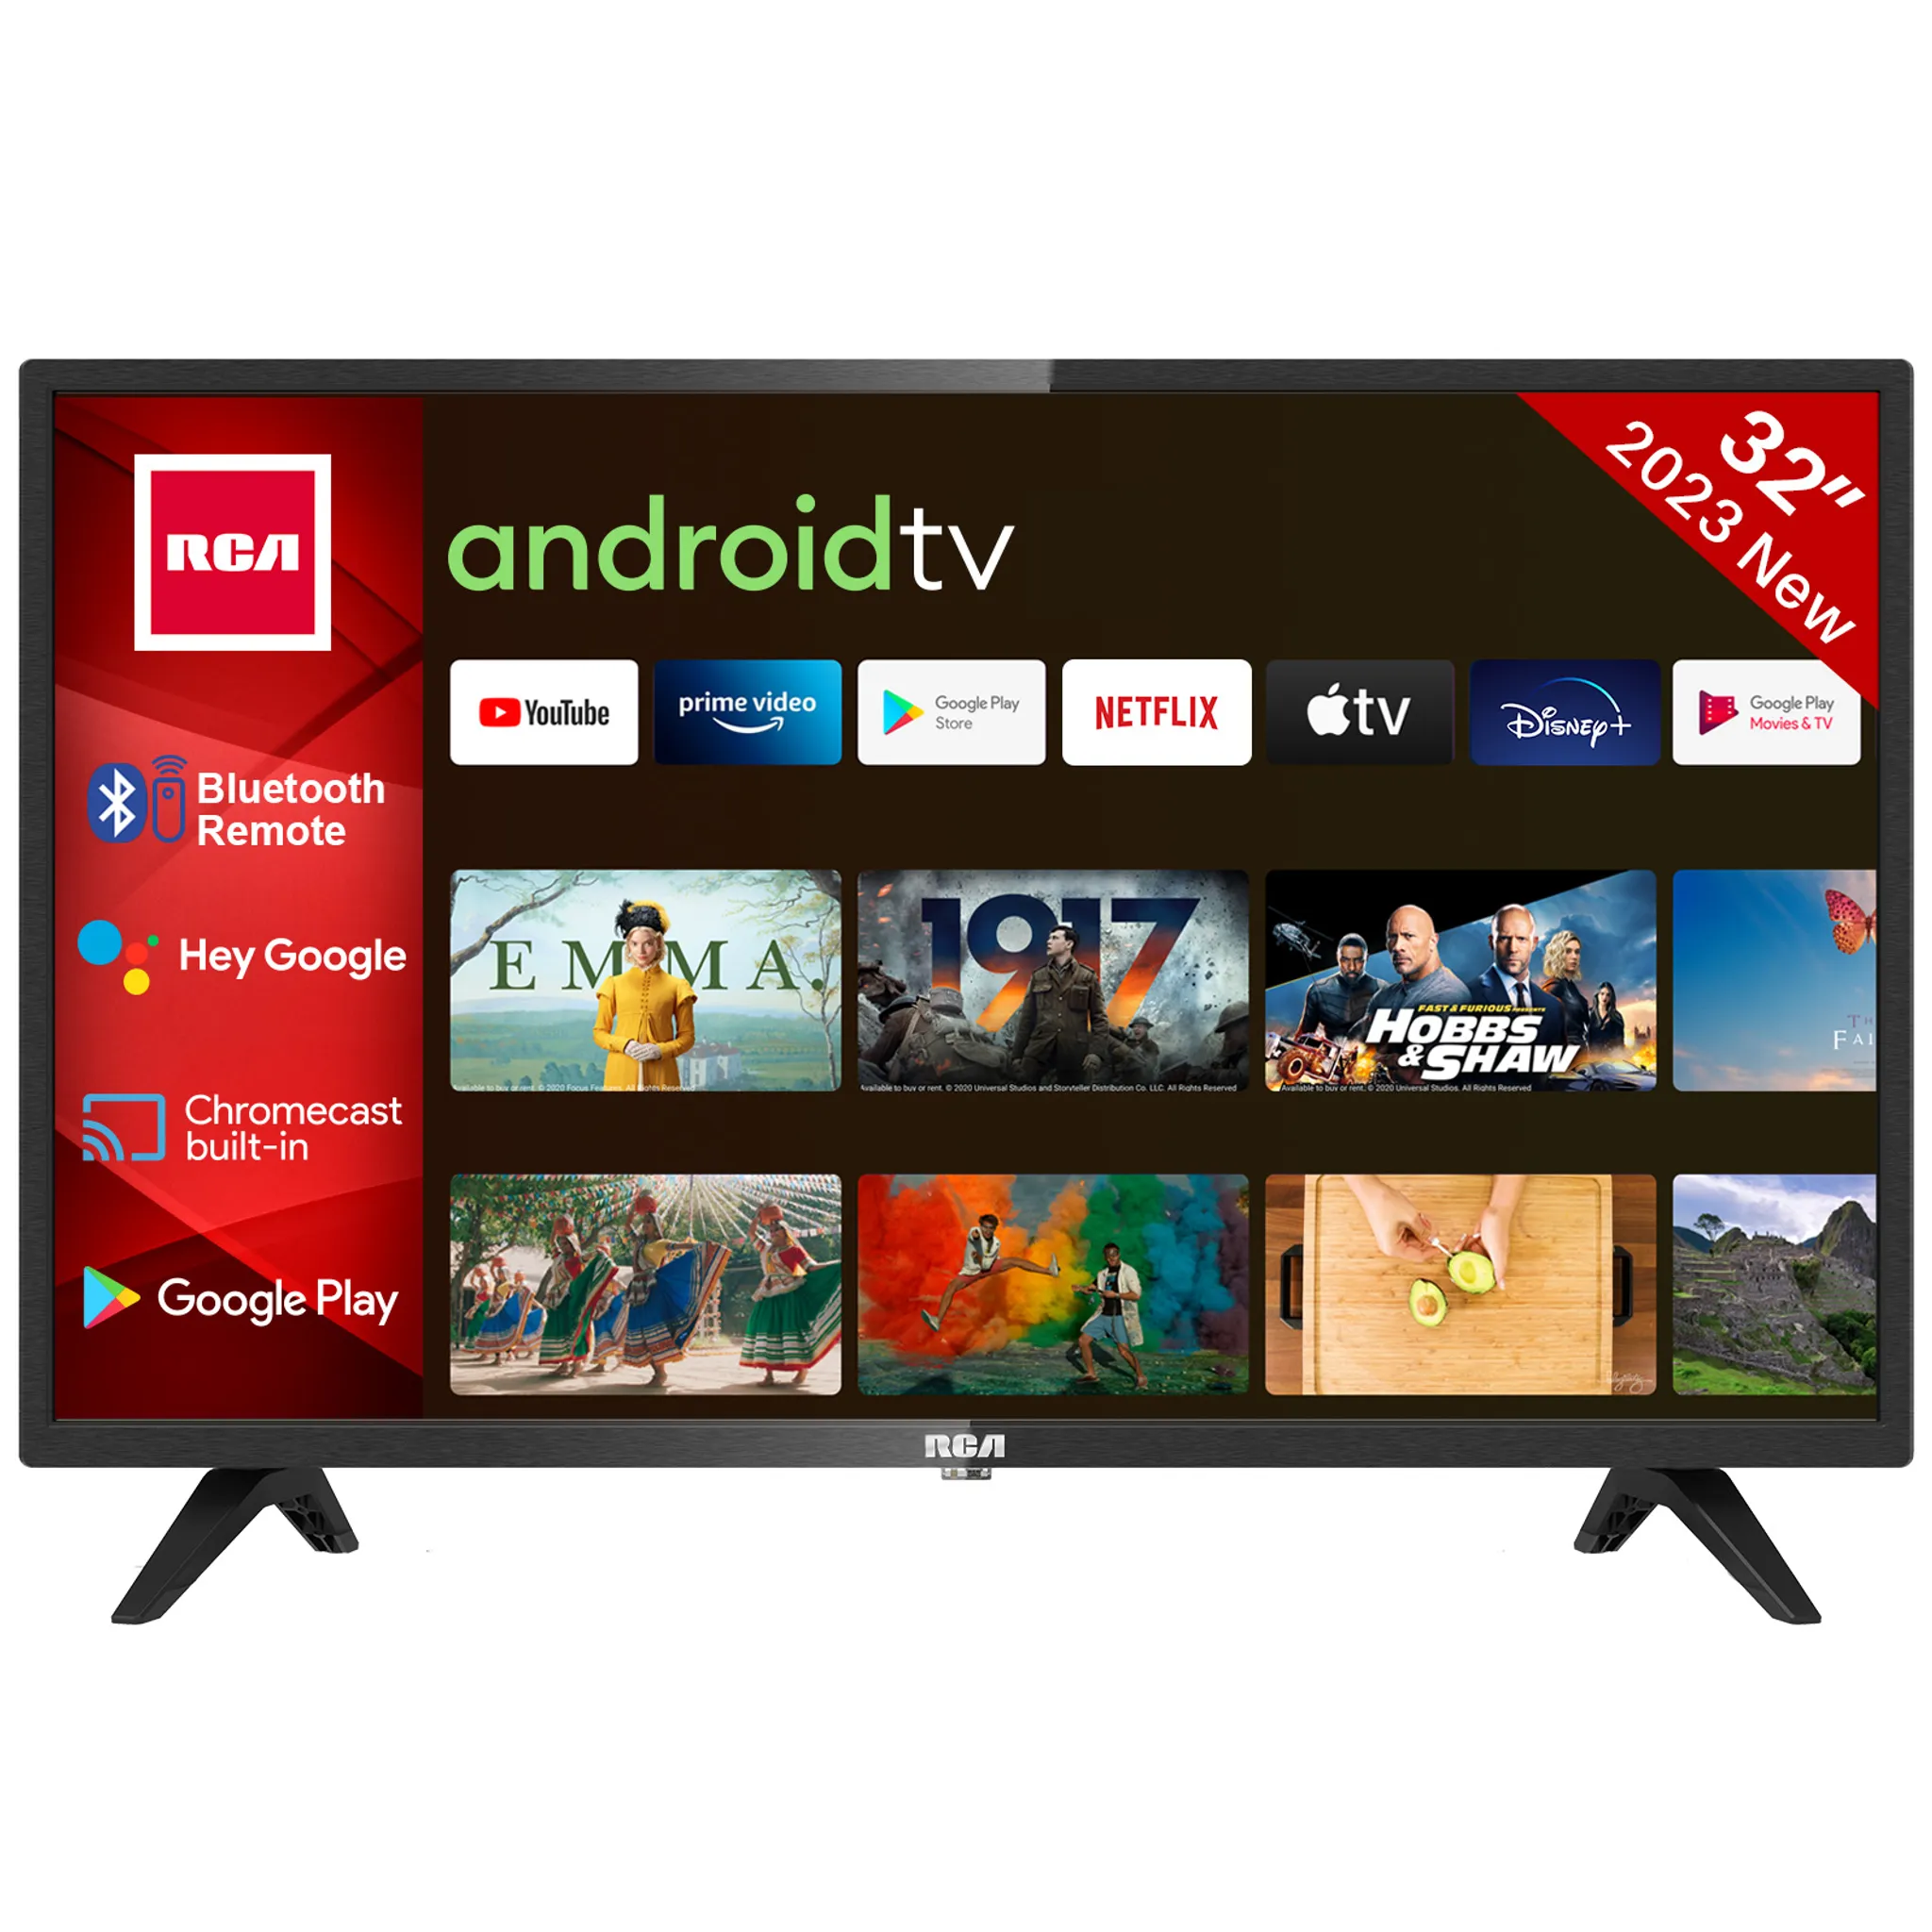 RCA RS32H2 Android TV (32 Zoll HD-ready Smart Kaufland.de